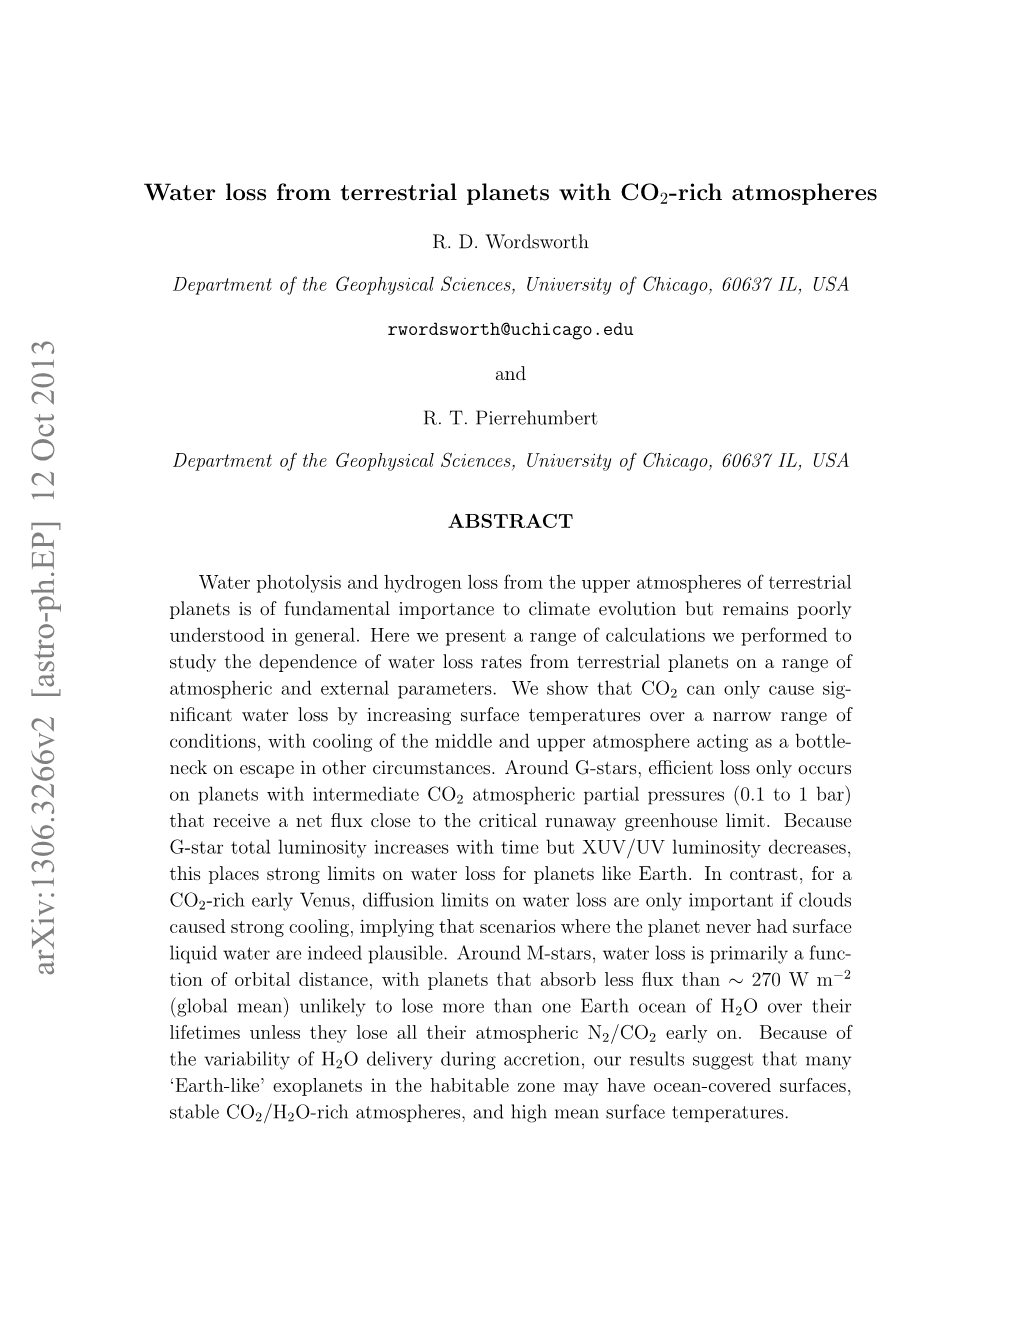 Water Loss from Terrestrial Planets with CO2-Rich Atmospheres